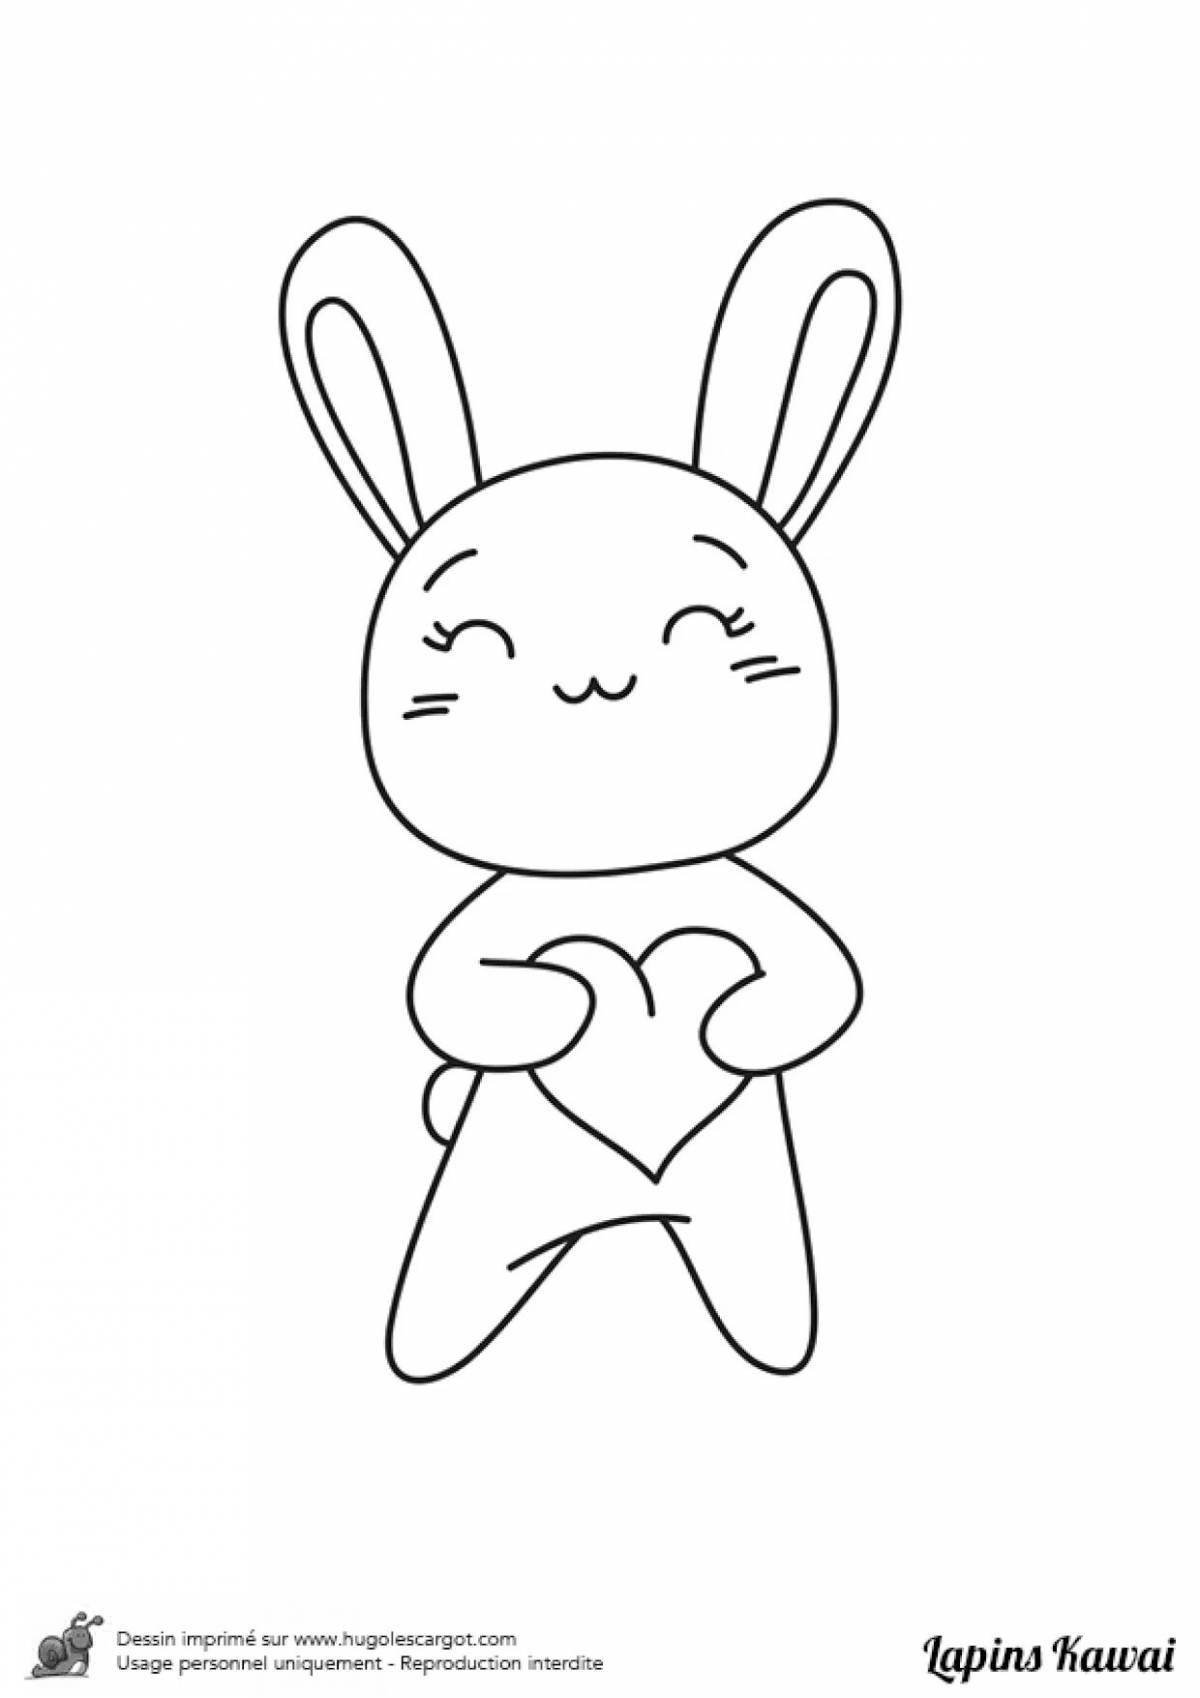 Funny bunny with a heart coloring book